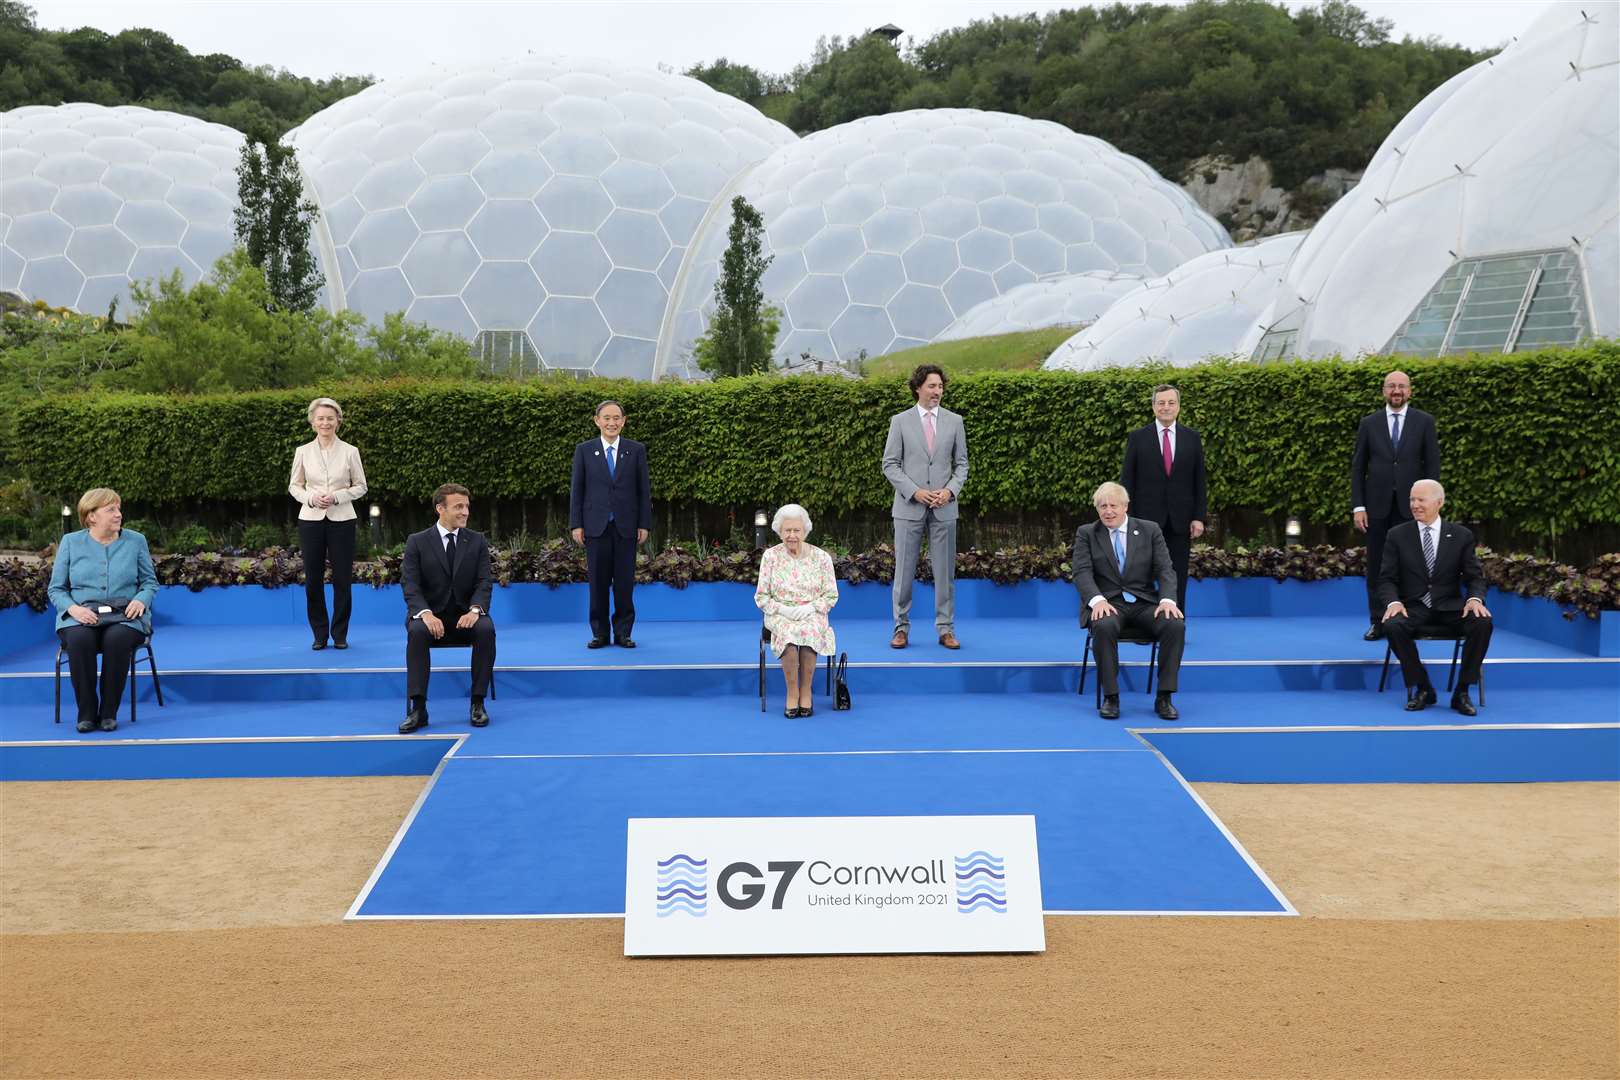 Queen Elizabeth II poses with G7 leaders before a reception at the Eden Project during the G7 summit in Cornwall (Jack Hill/The Times)